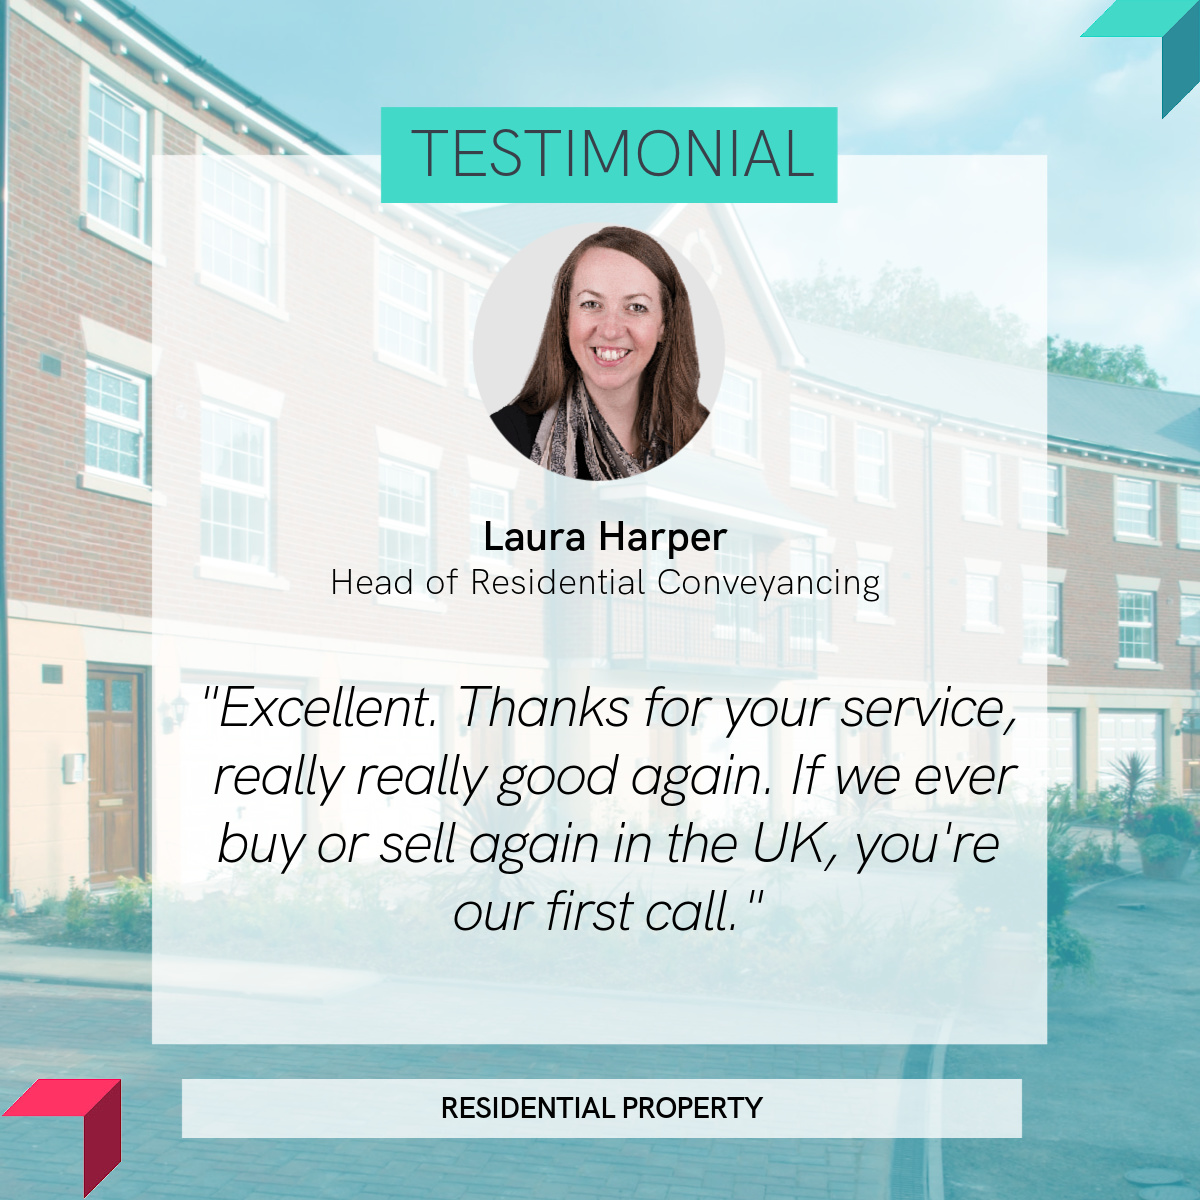 #TestimonialTuesday
Well done Laura Harper for receiving this lovely client review.

#BerladGrahamSolicitors #residentialproperty #conveyancing #conveyancingsolicitor #conveyancinglawyer #buyingahouse #sellingyourhome #solicitorsuk #leaseextension #leasepurchase #landlorddispute